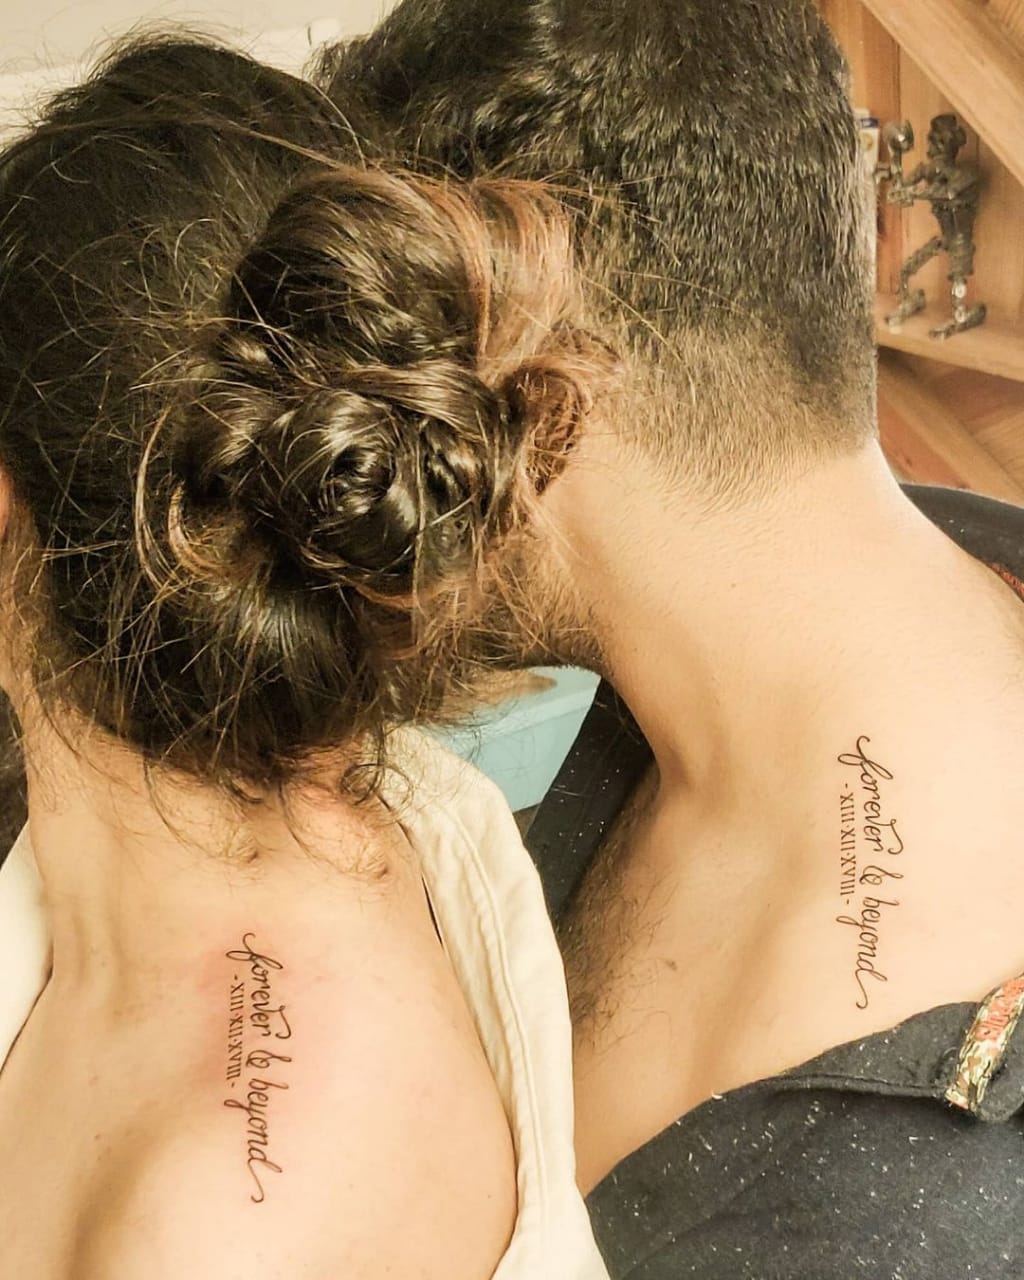 60 Meaningful Couple Tattoos To Strengthen The Bond  Glaminati